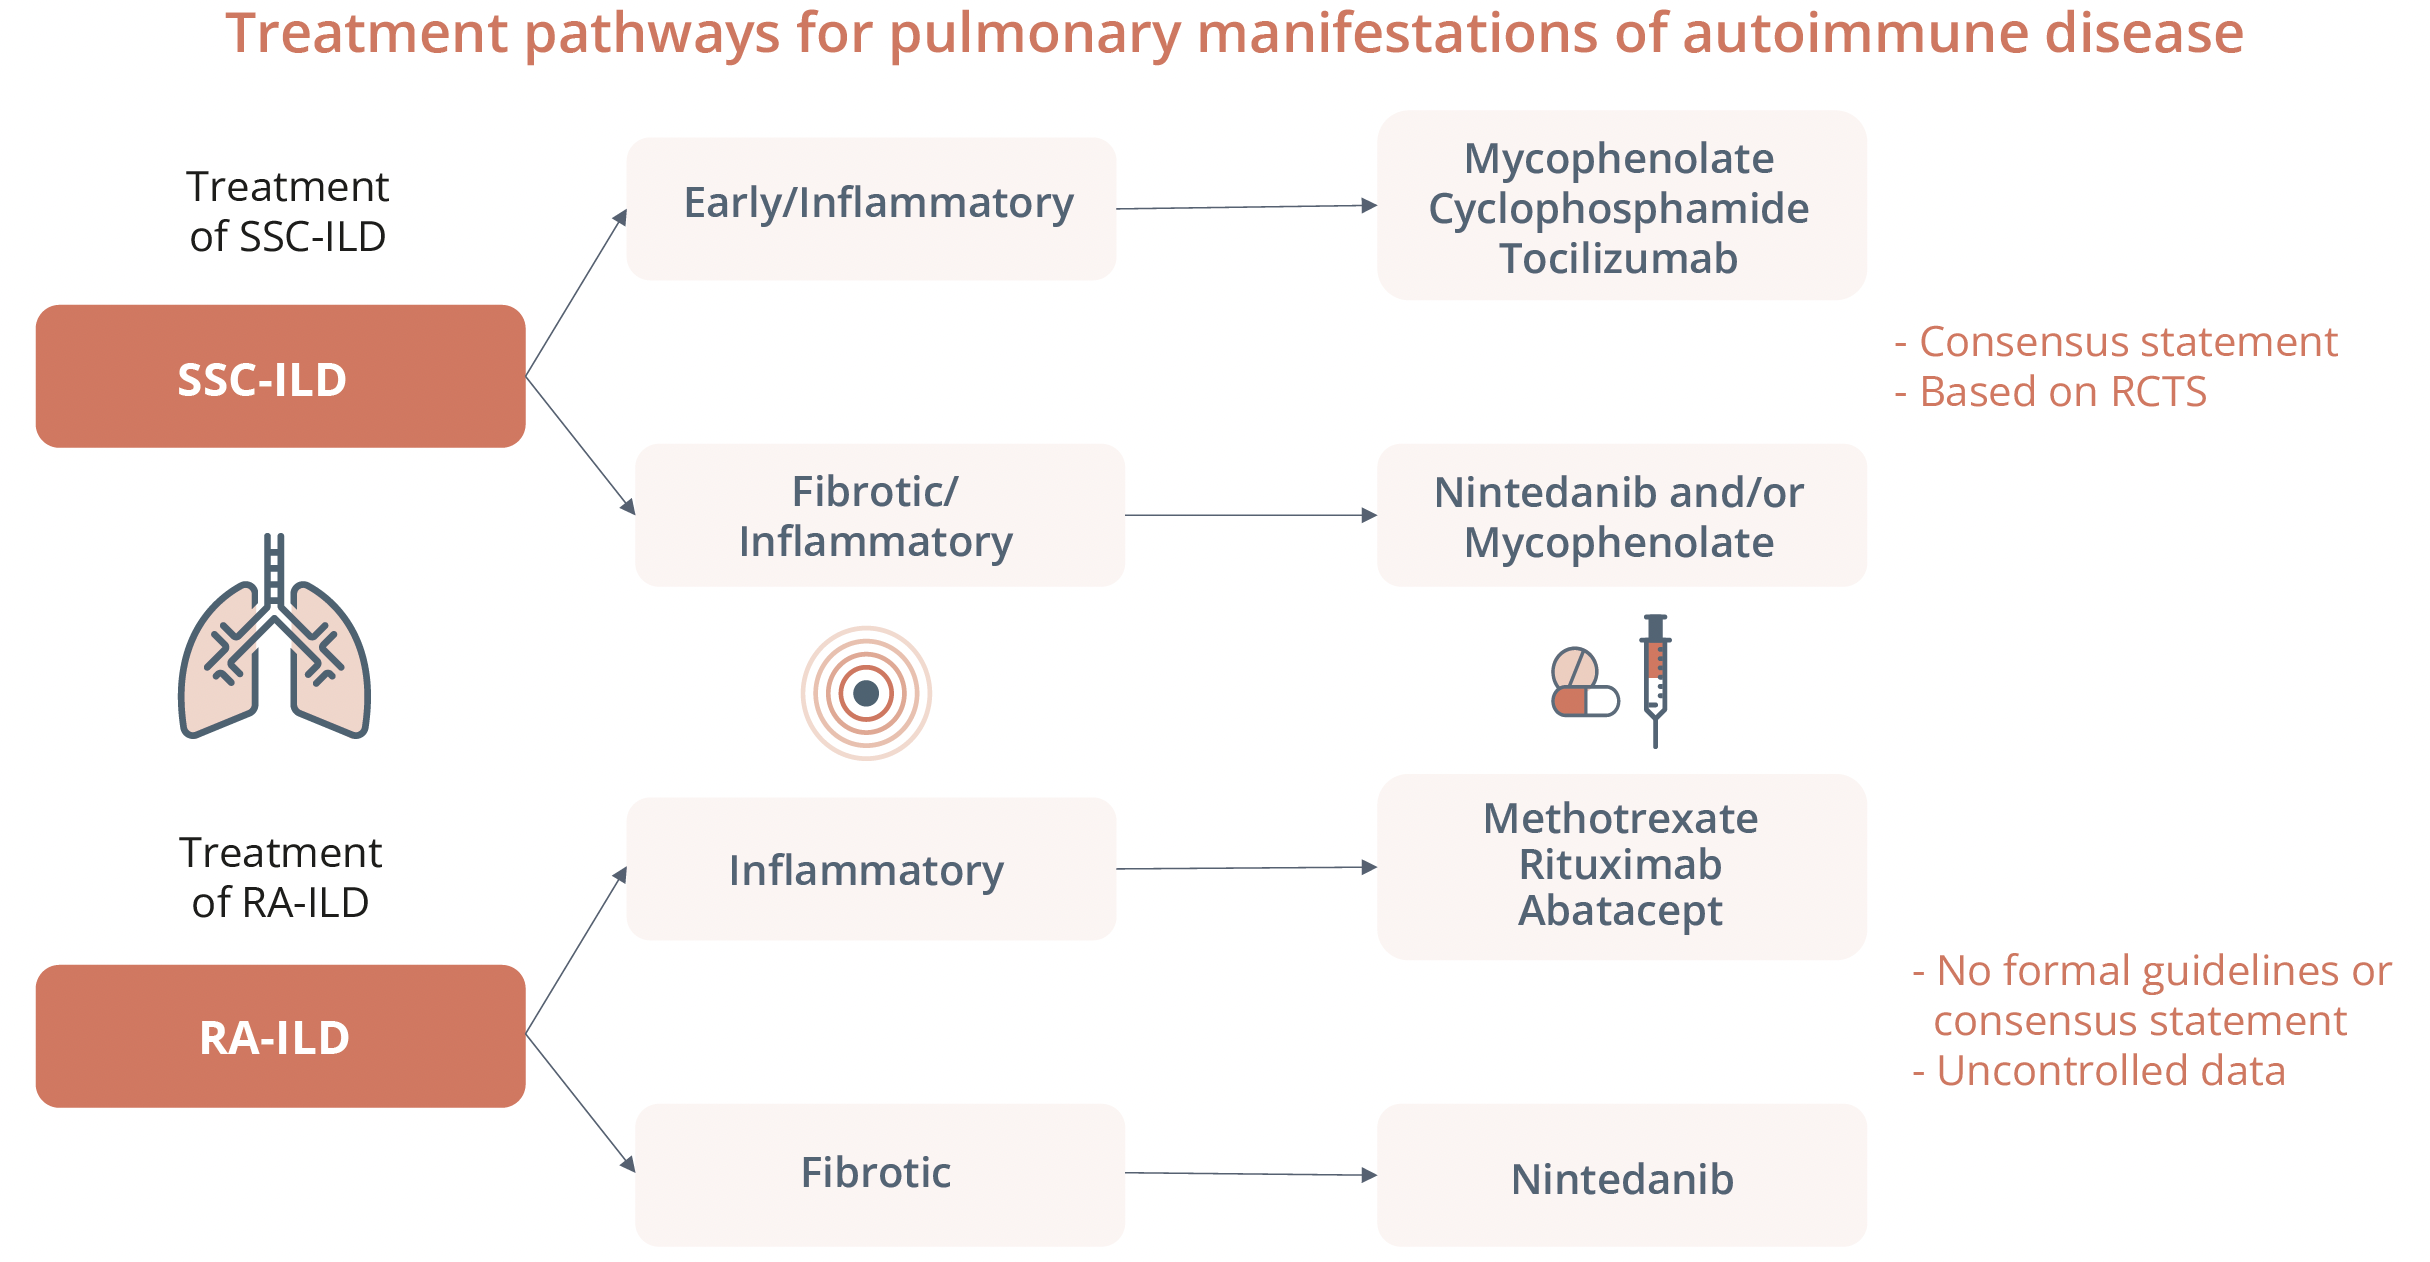 Treatment pathways and evidence for systemic sclerosis or rheumatoid arthritis associated with interstitial lung disease